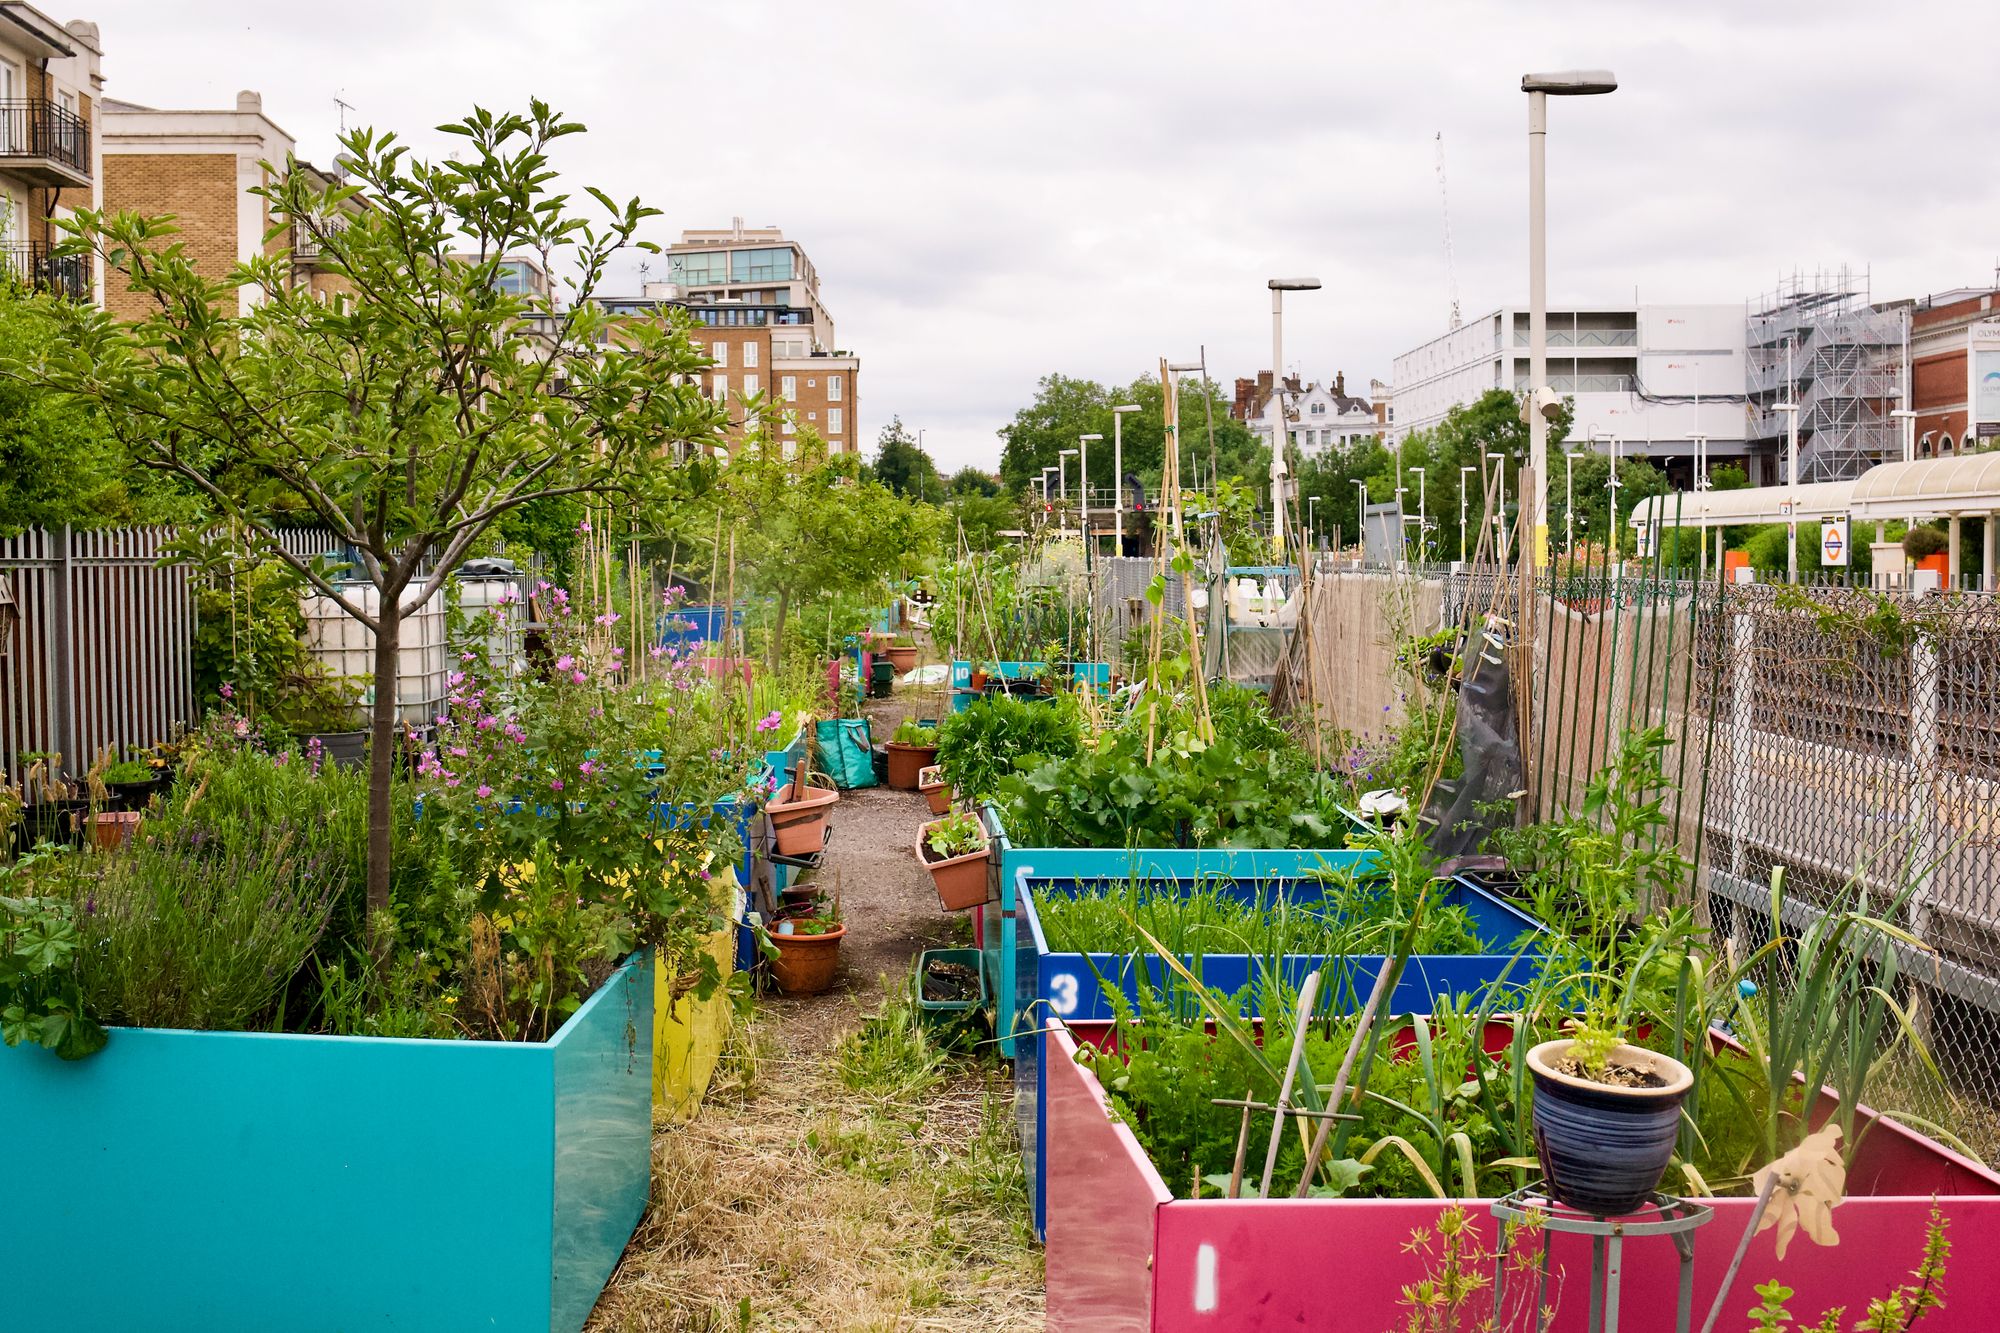 In grey city spaces, a greener future is growing